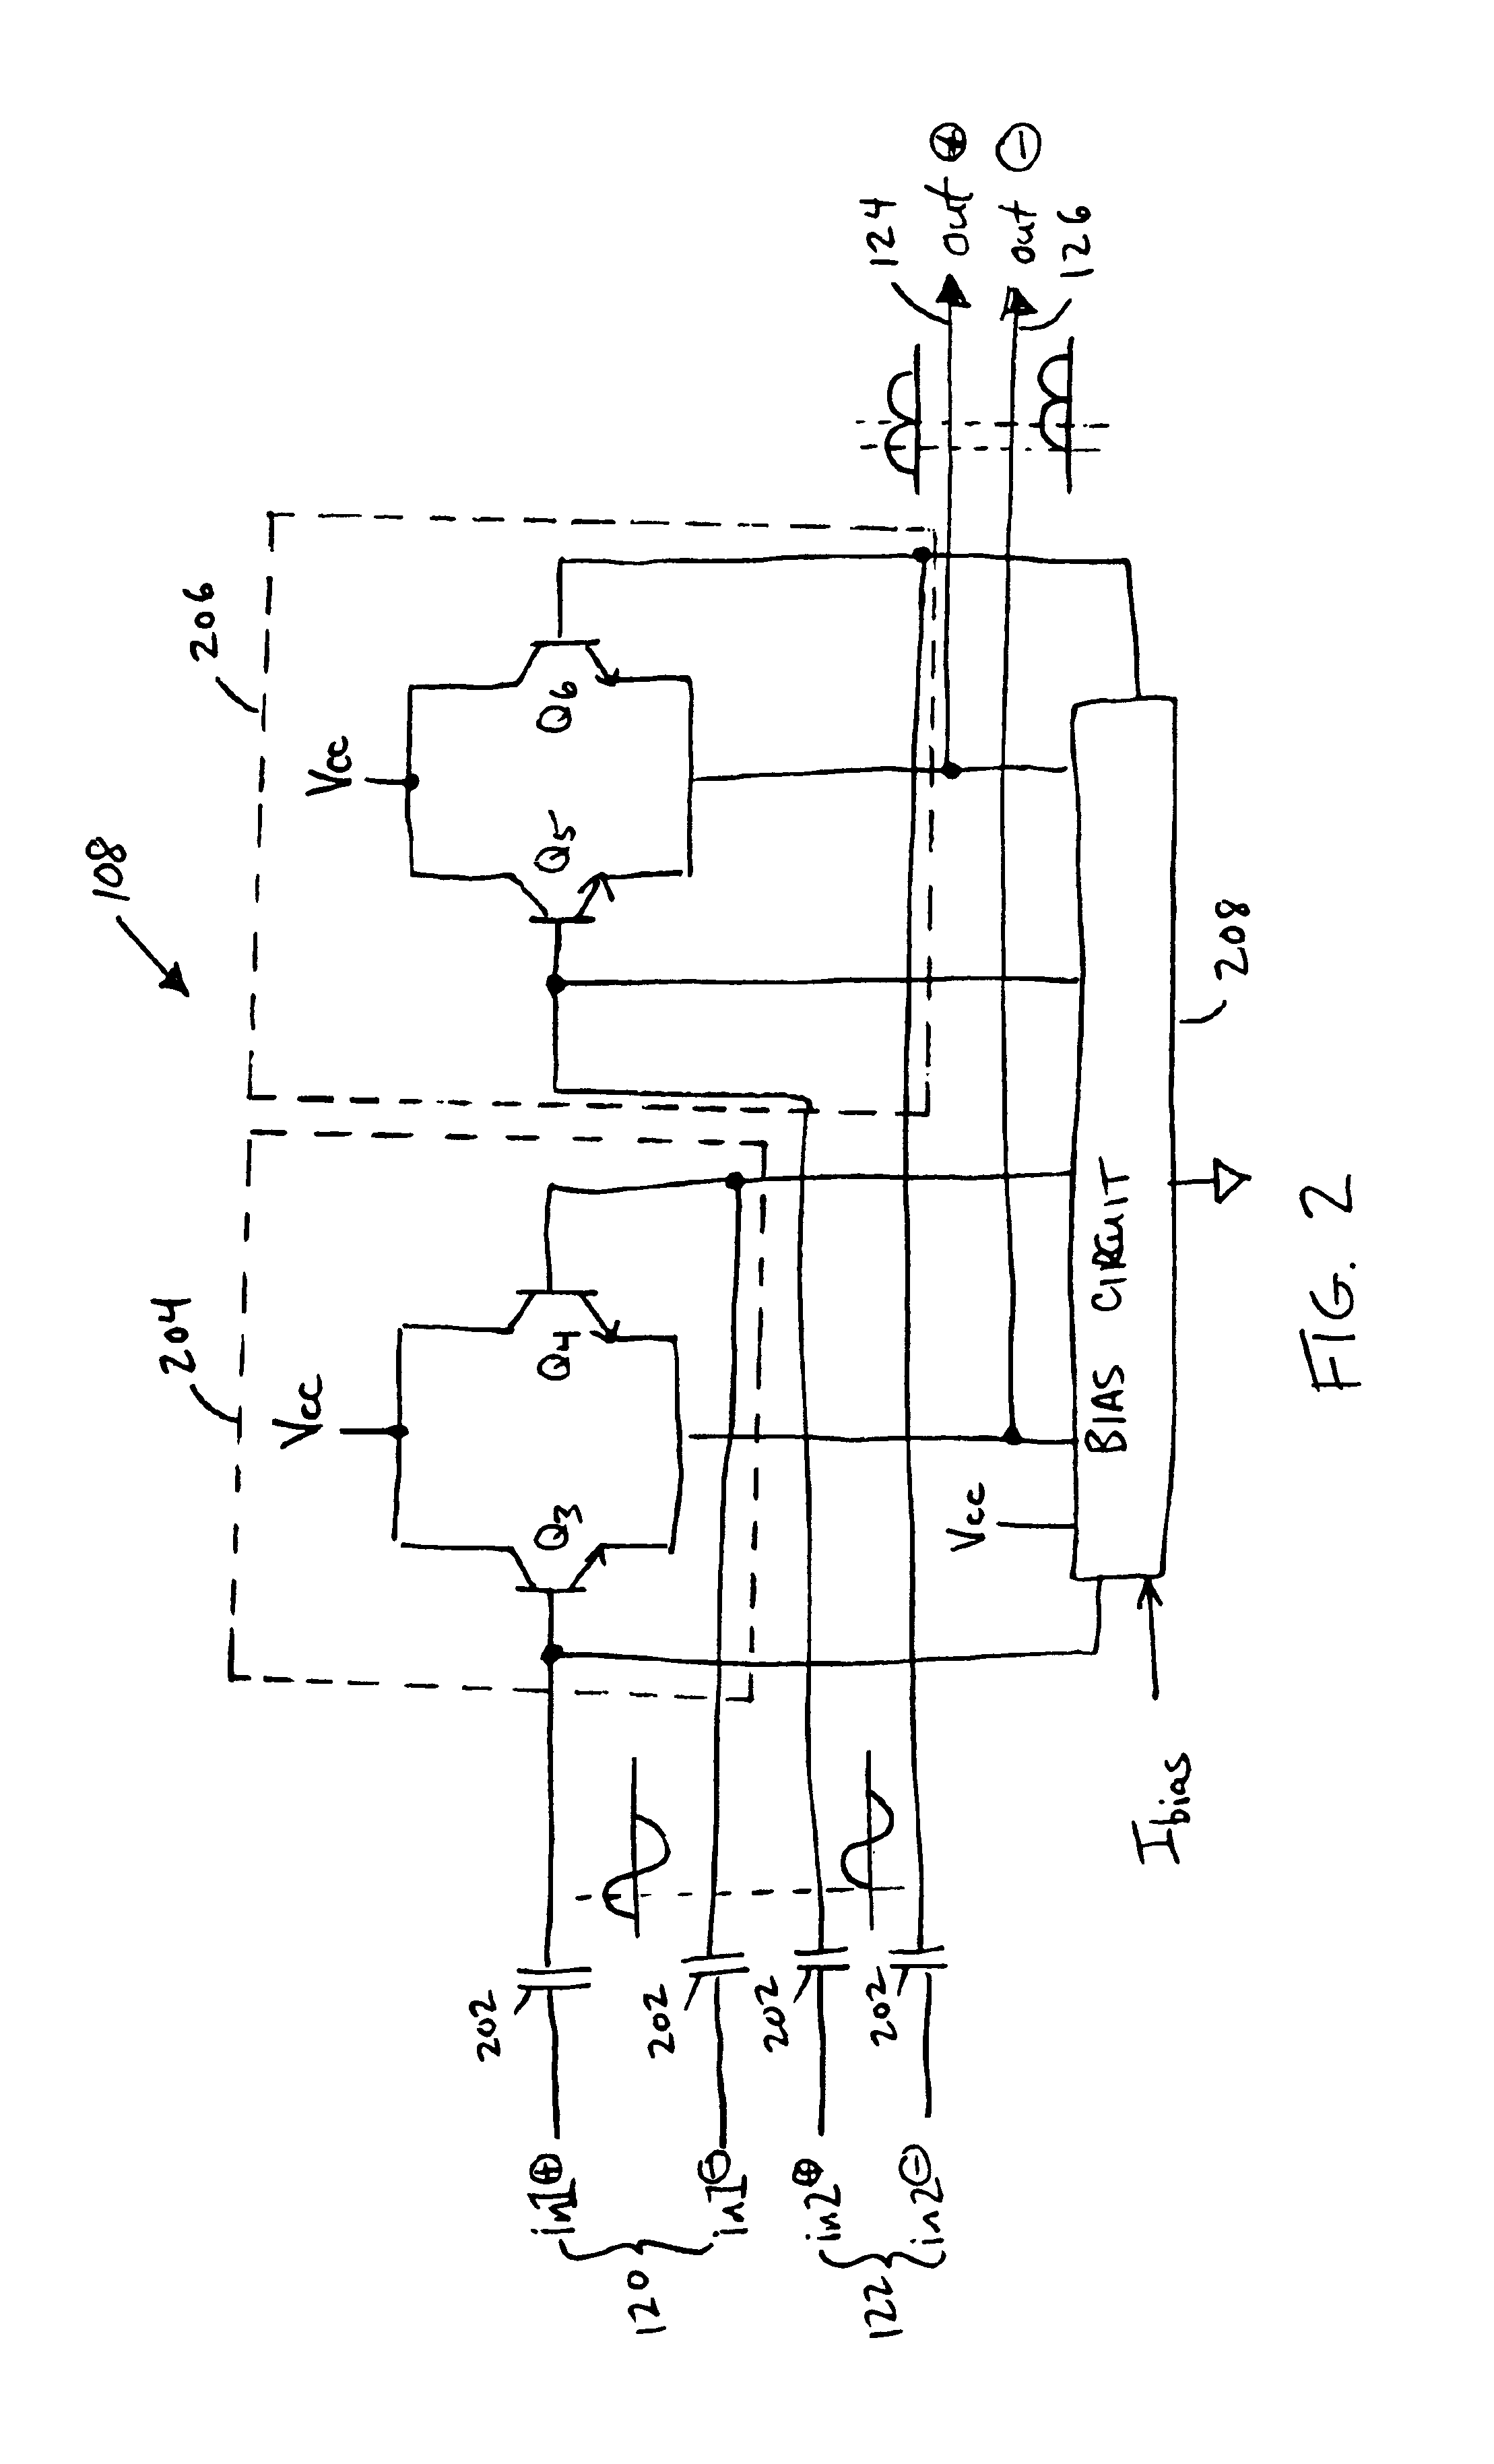 Rectifier type frequency doubler with harmonic cancellation